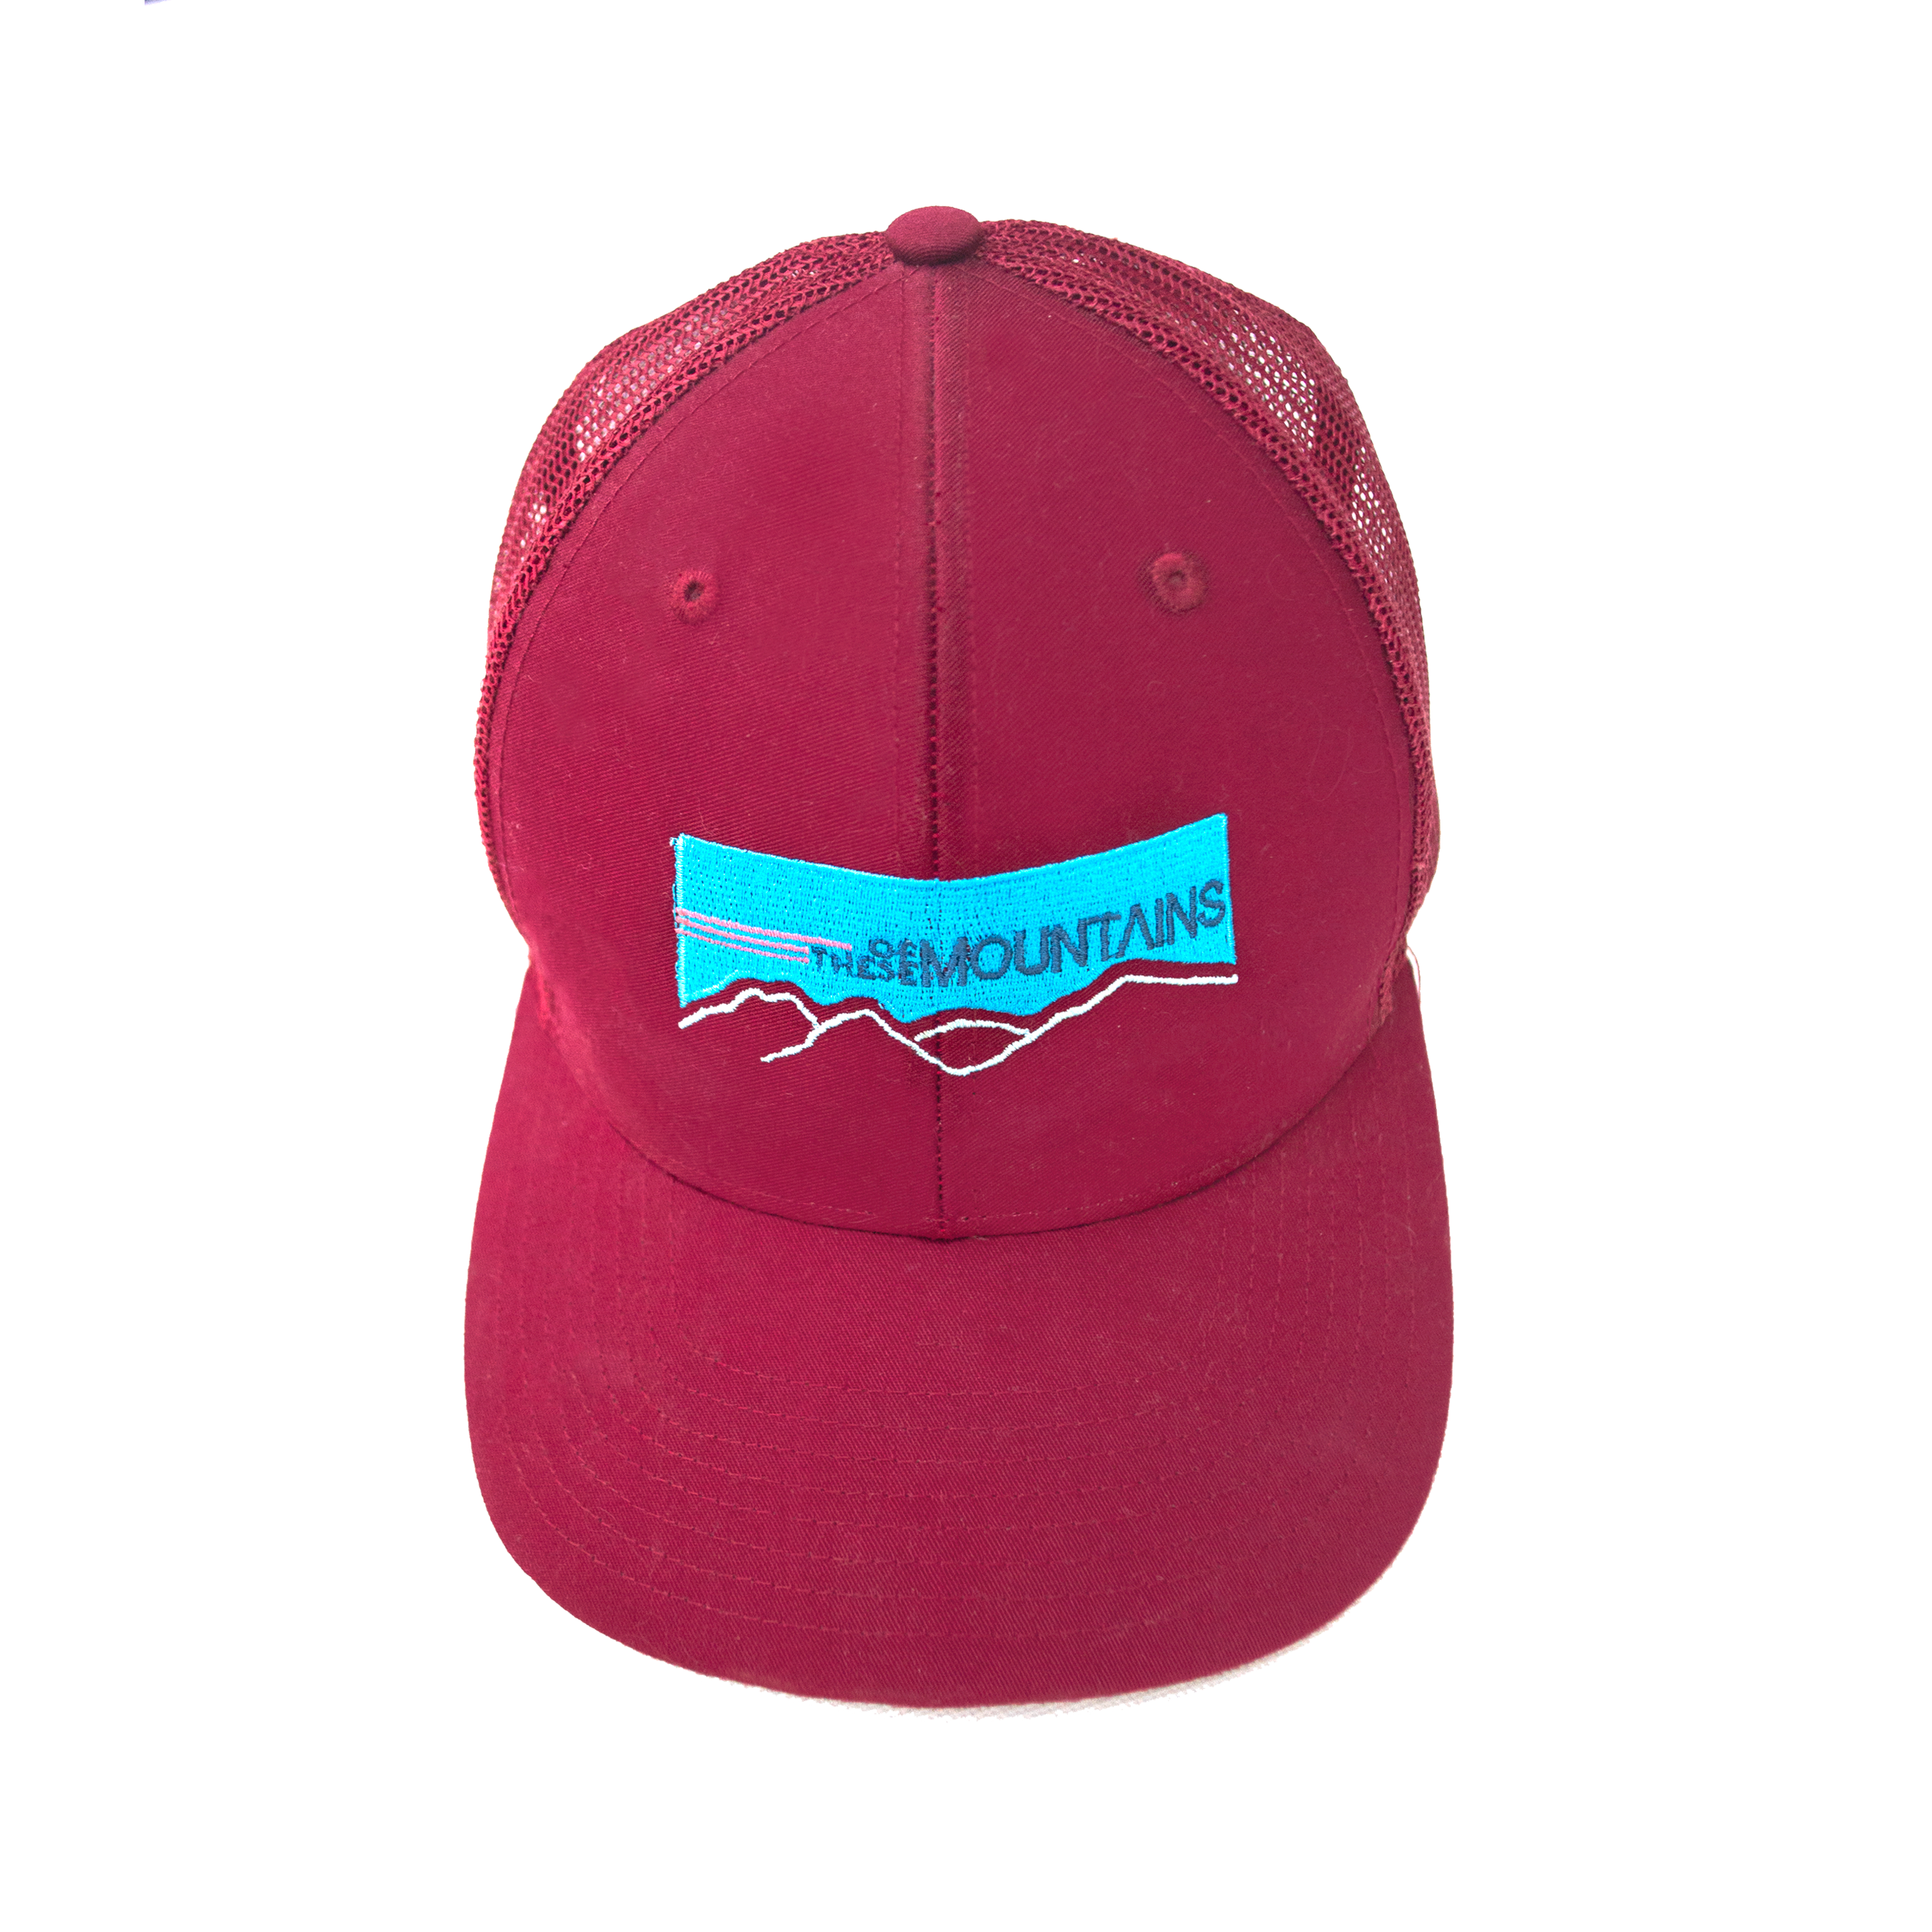 Of These Mountains Ruby Mountain Trucker Hat